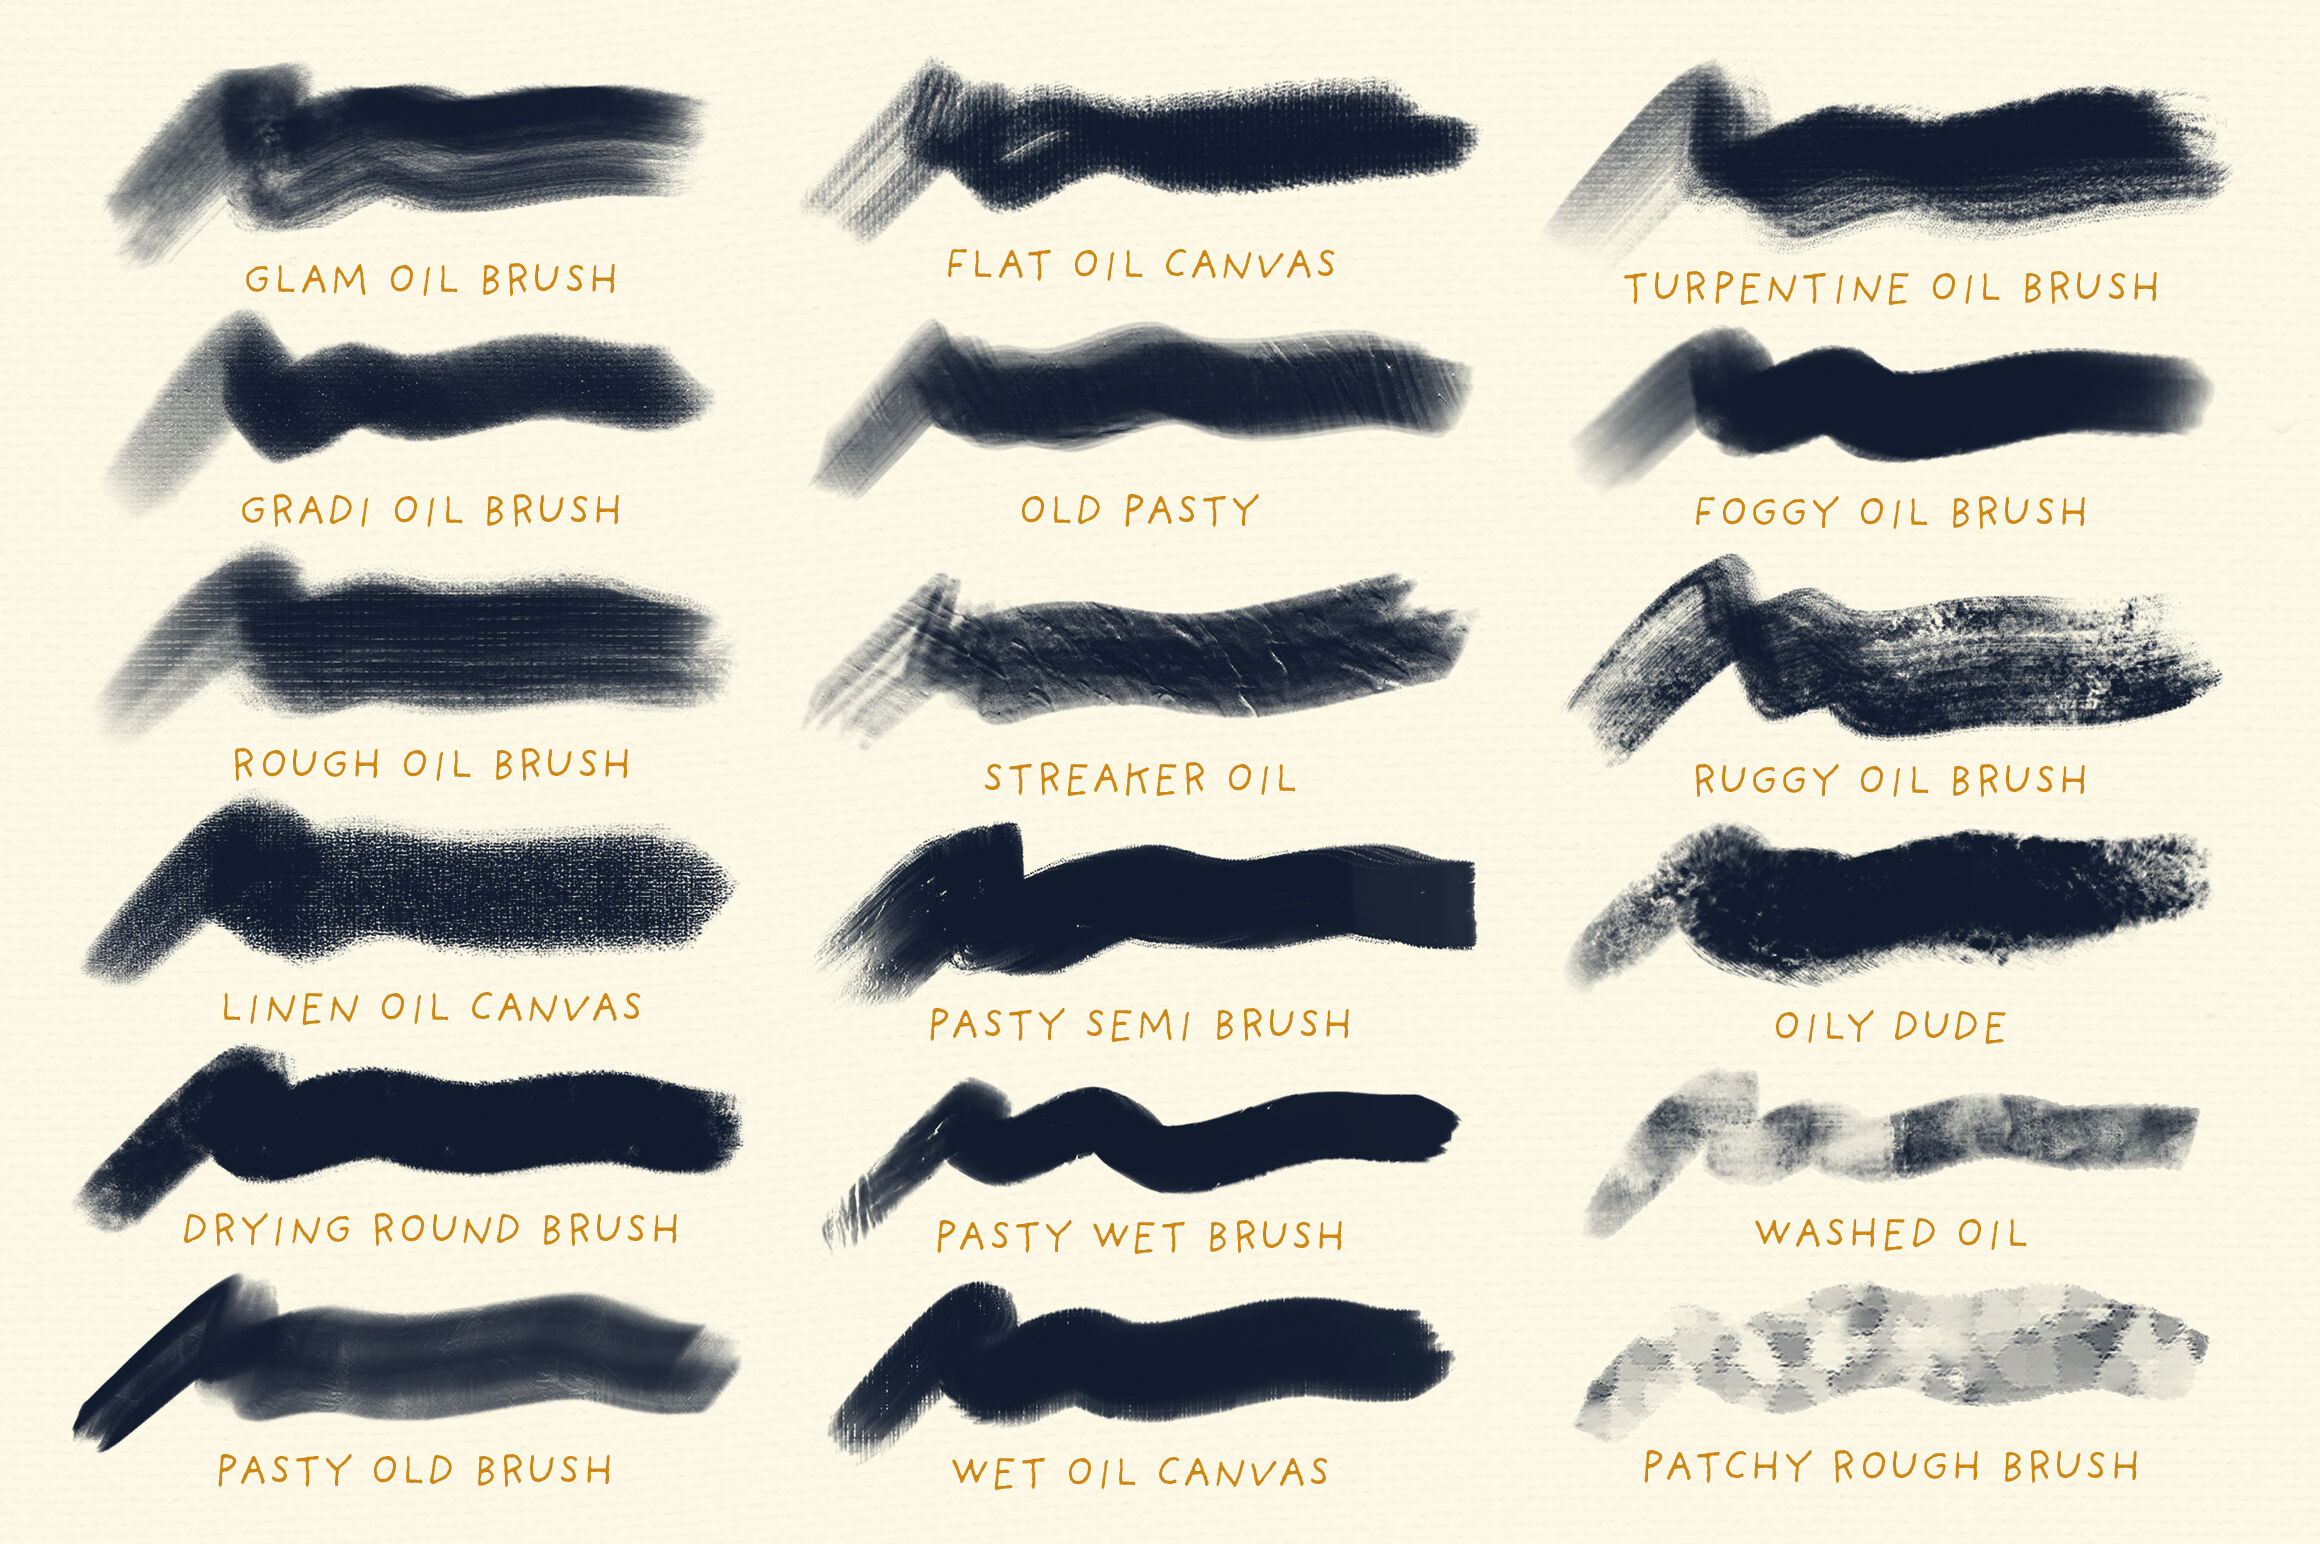 Oil Paint Brushes for Procreate By Guerillacraft